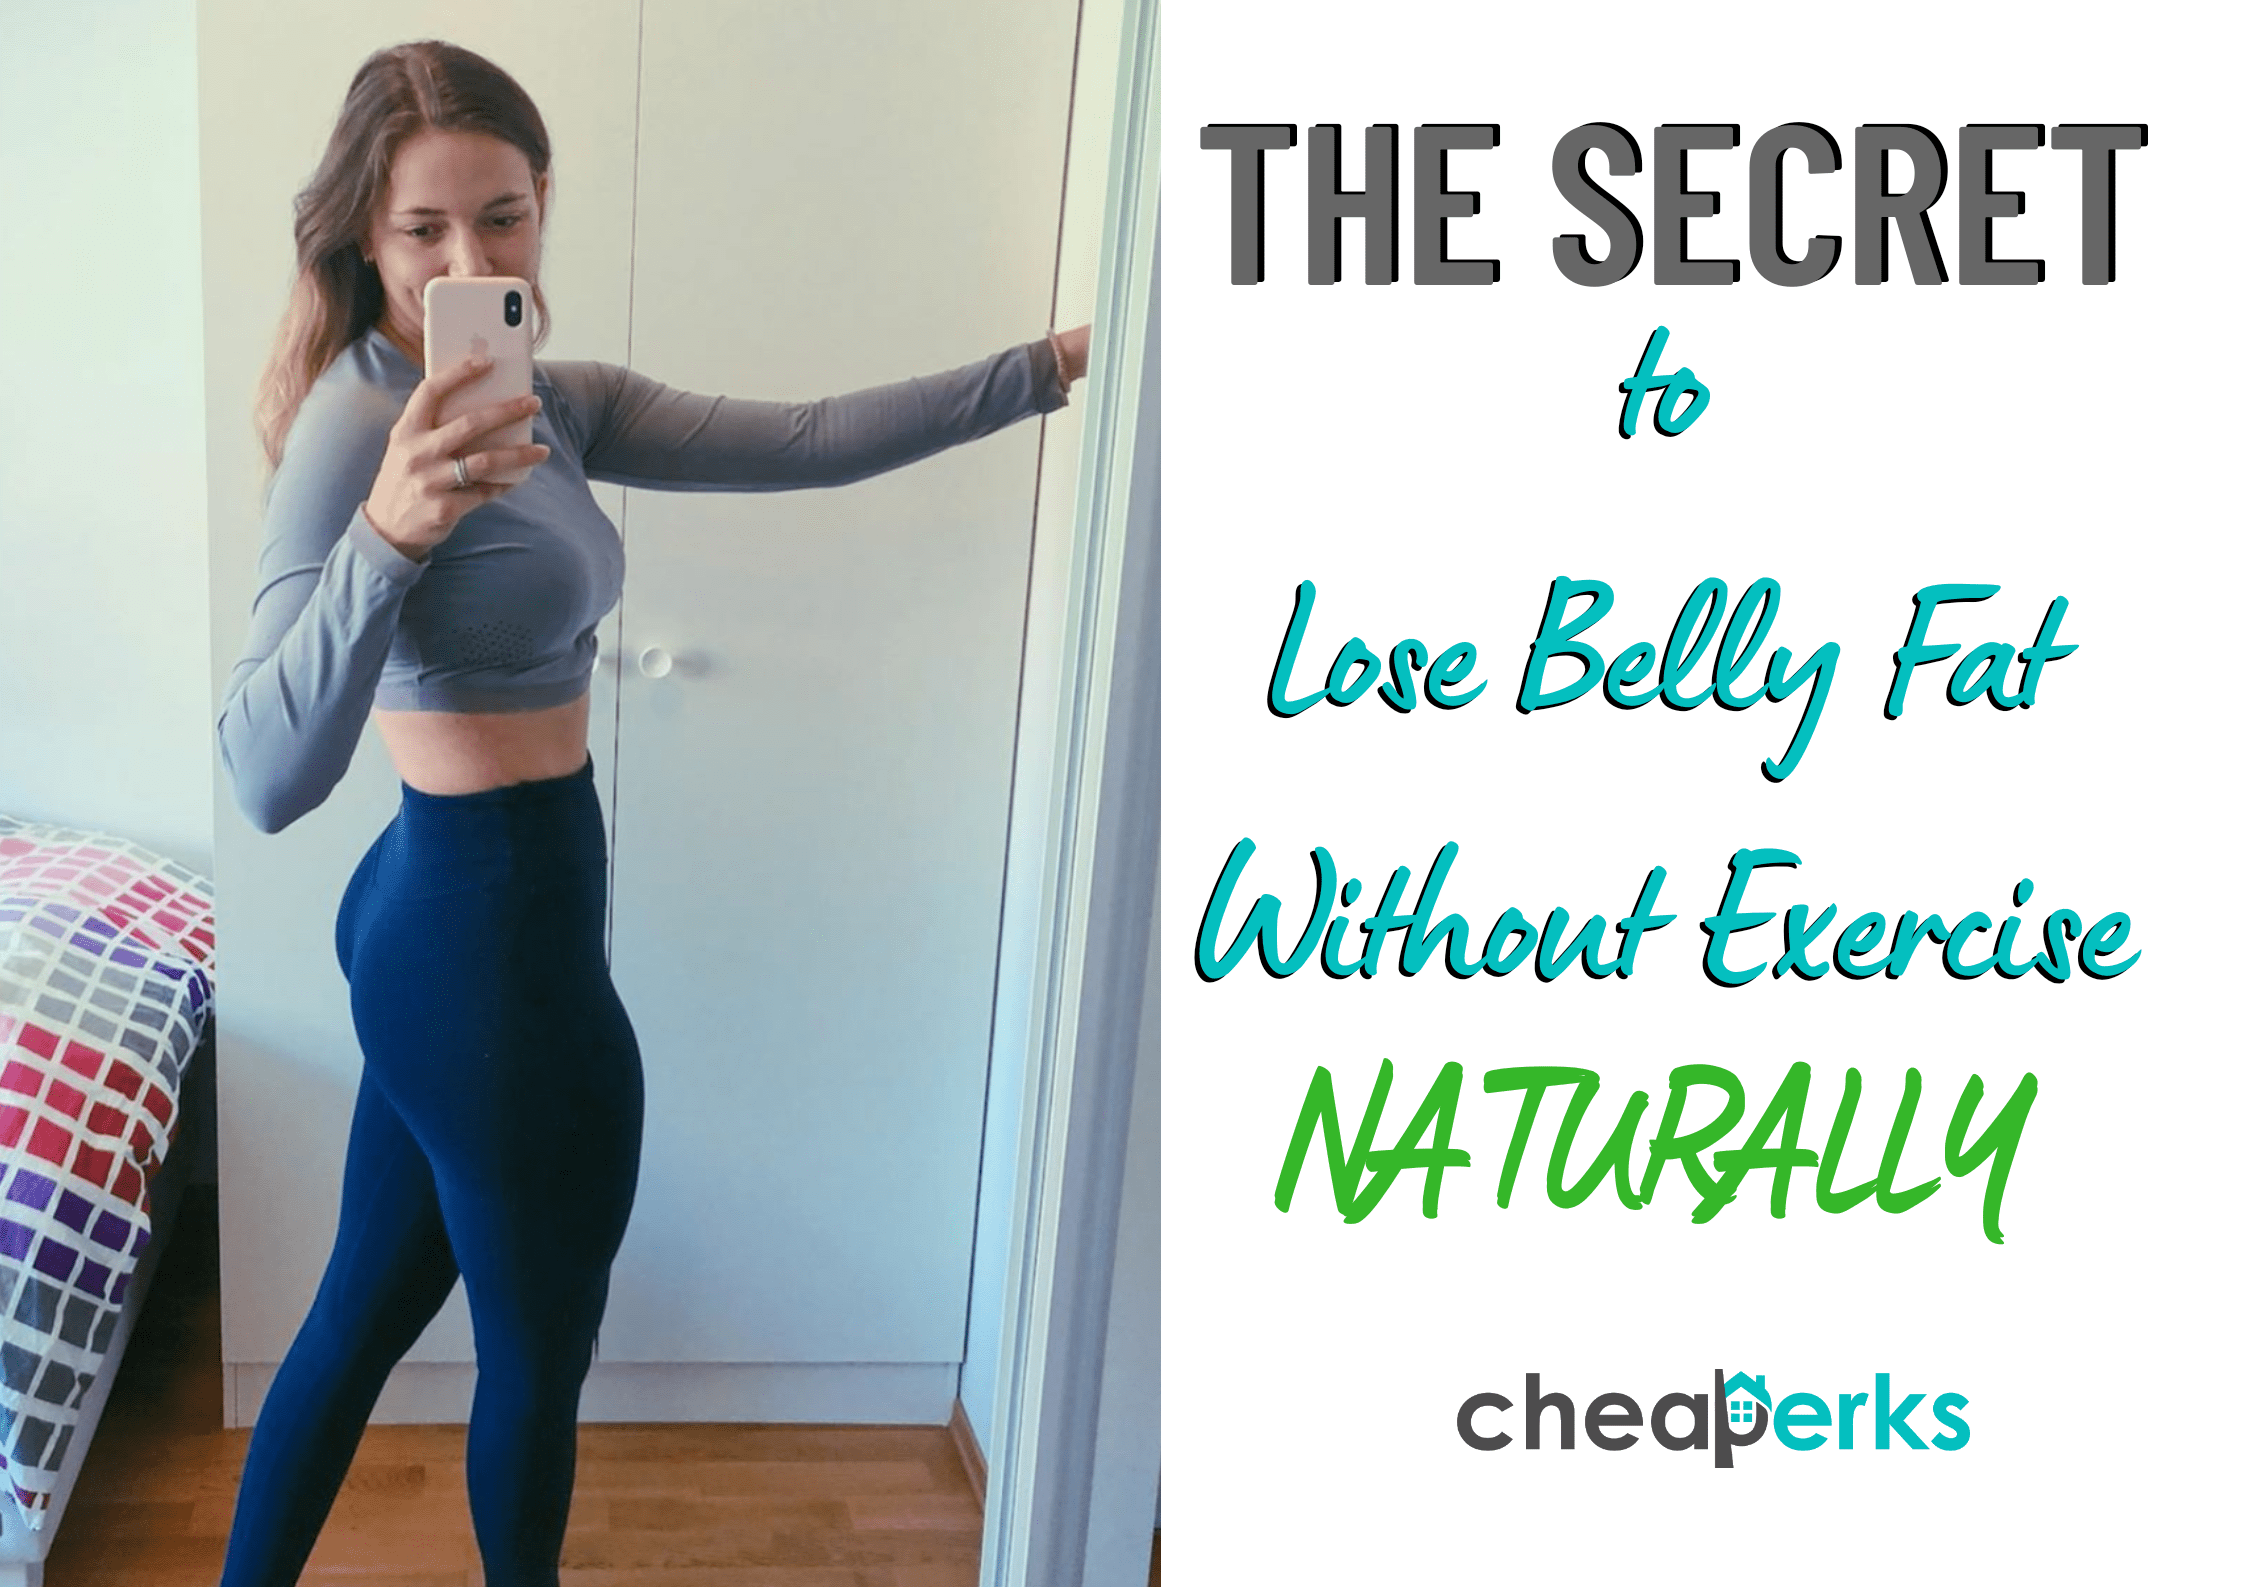 The Secret to Lose Belly Fat without Exercise NATURALLY! - cheaperks